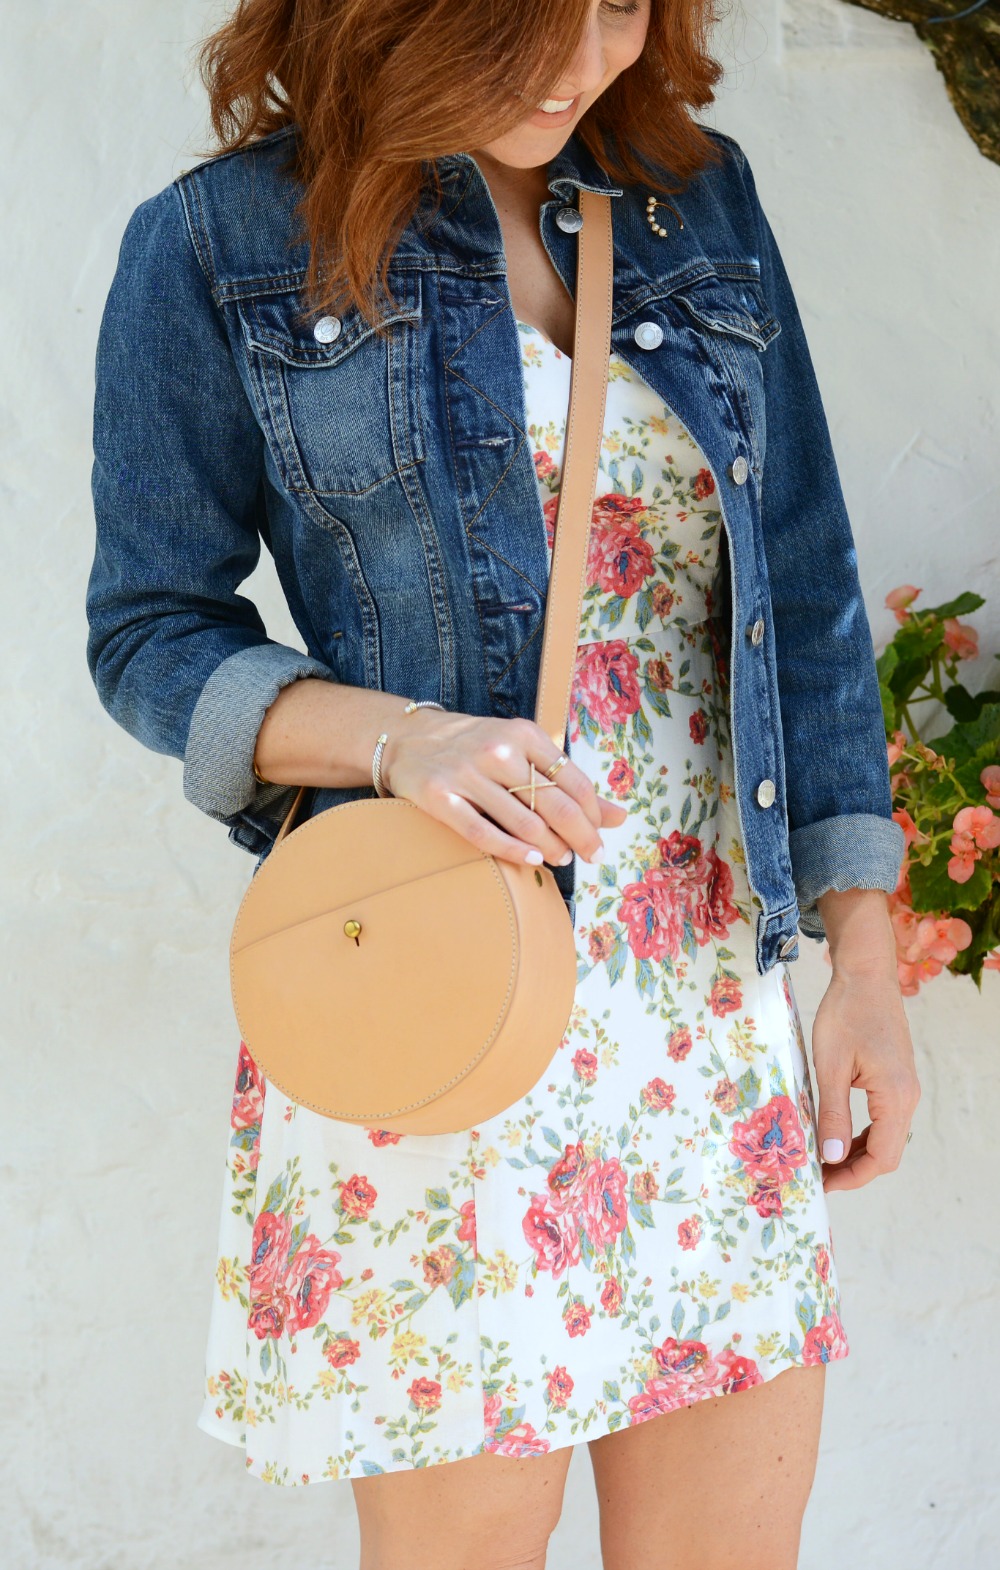 Madewell circle bag completes a timeless spring look // modern savvy, a life & style blog for women over 30